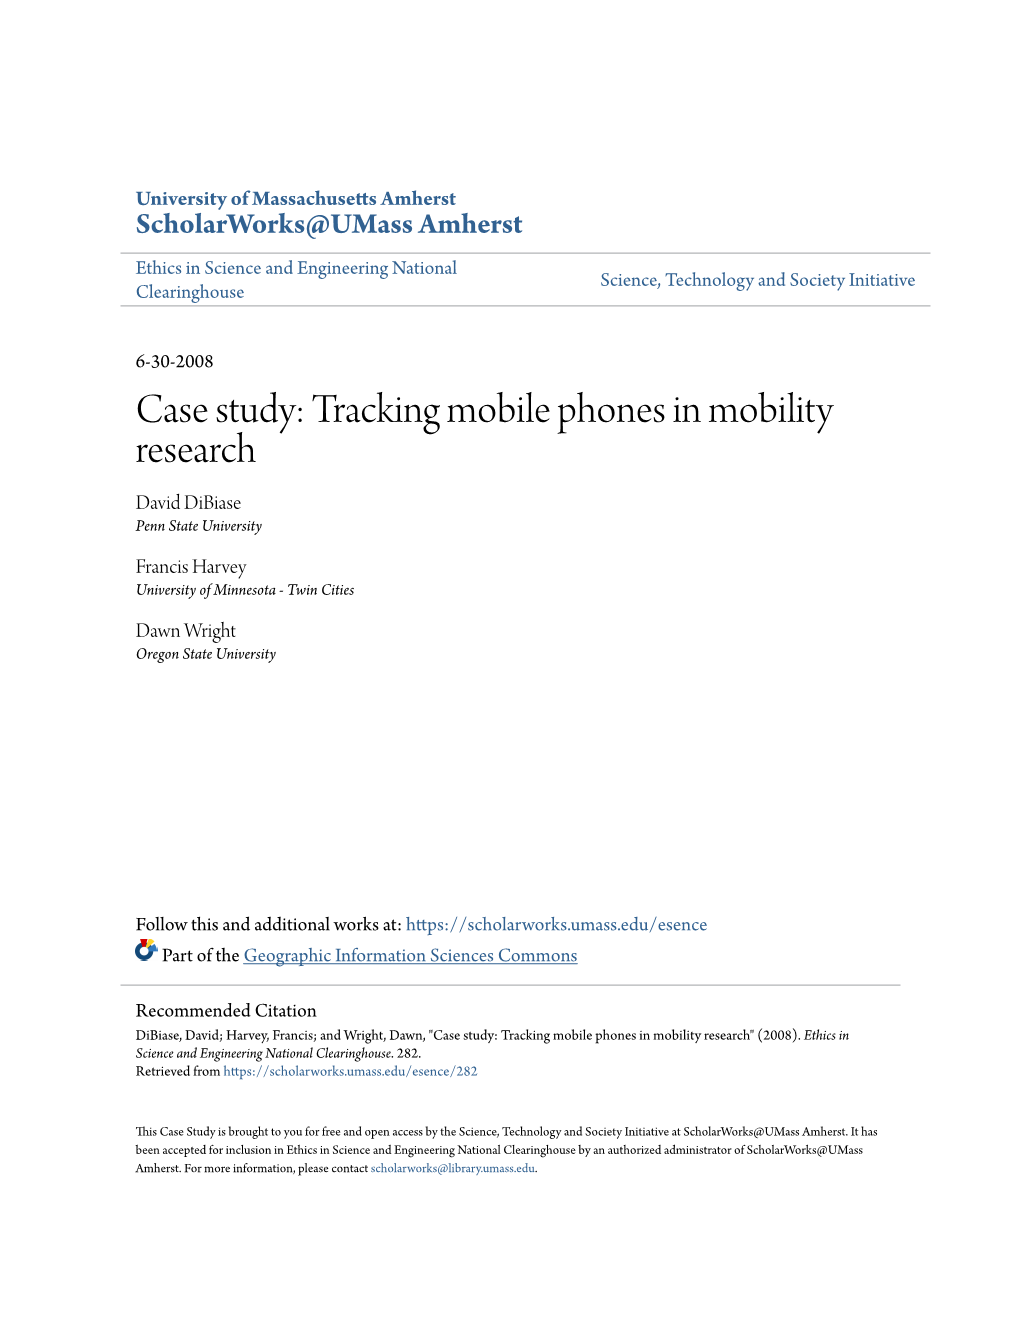 Tracking Mobile Phones in Mobility Research David Dibiase Penn State University